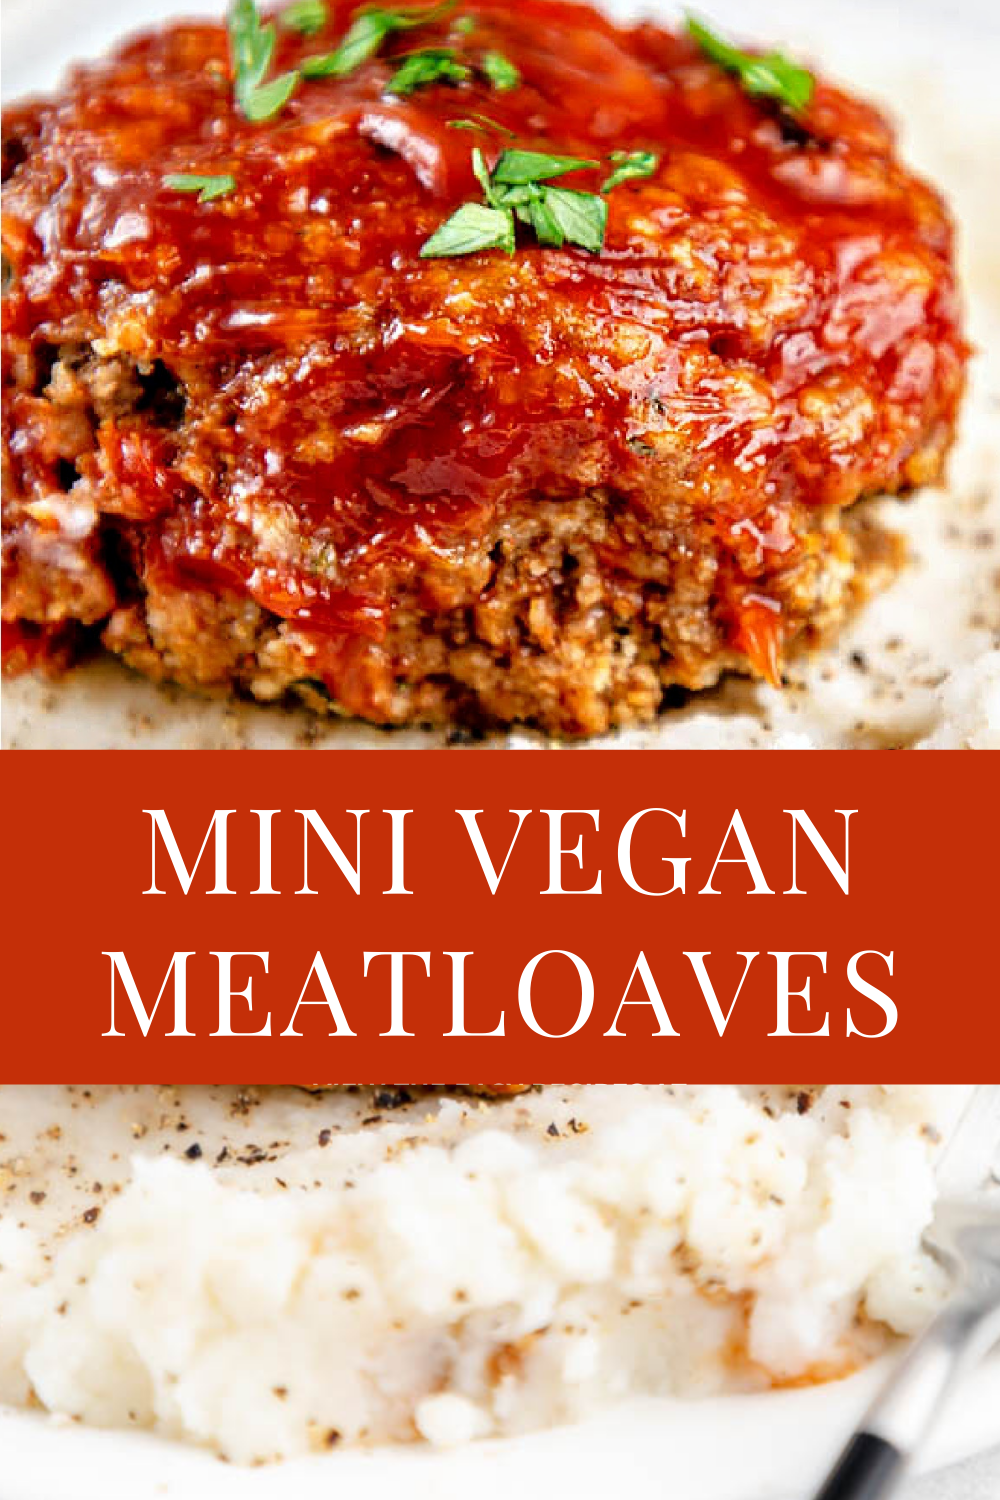 Mini Meatloaves ~ You'll love this savory and perfectly portioned, 100% plant-based version of the comfort food classic!  via @thiswifecooks